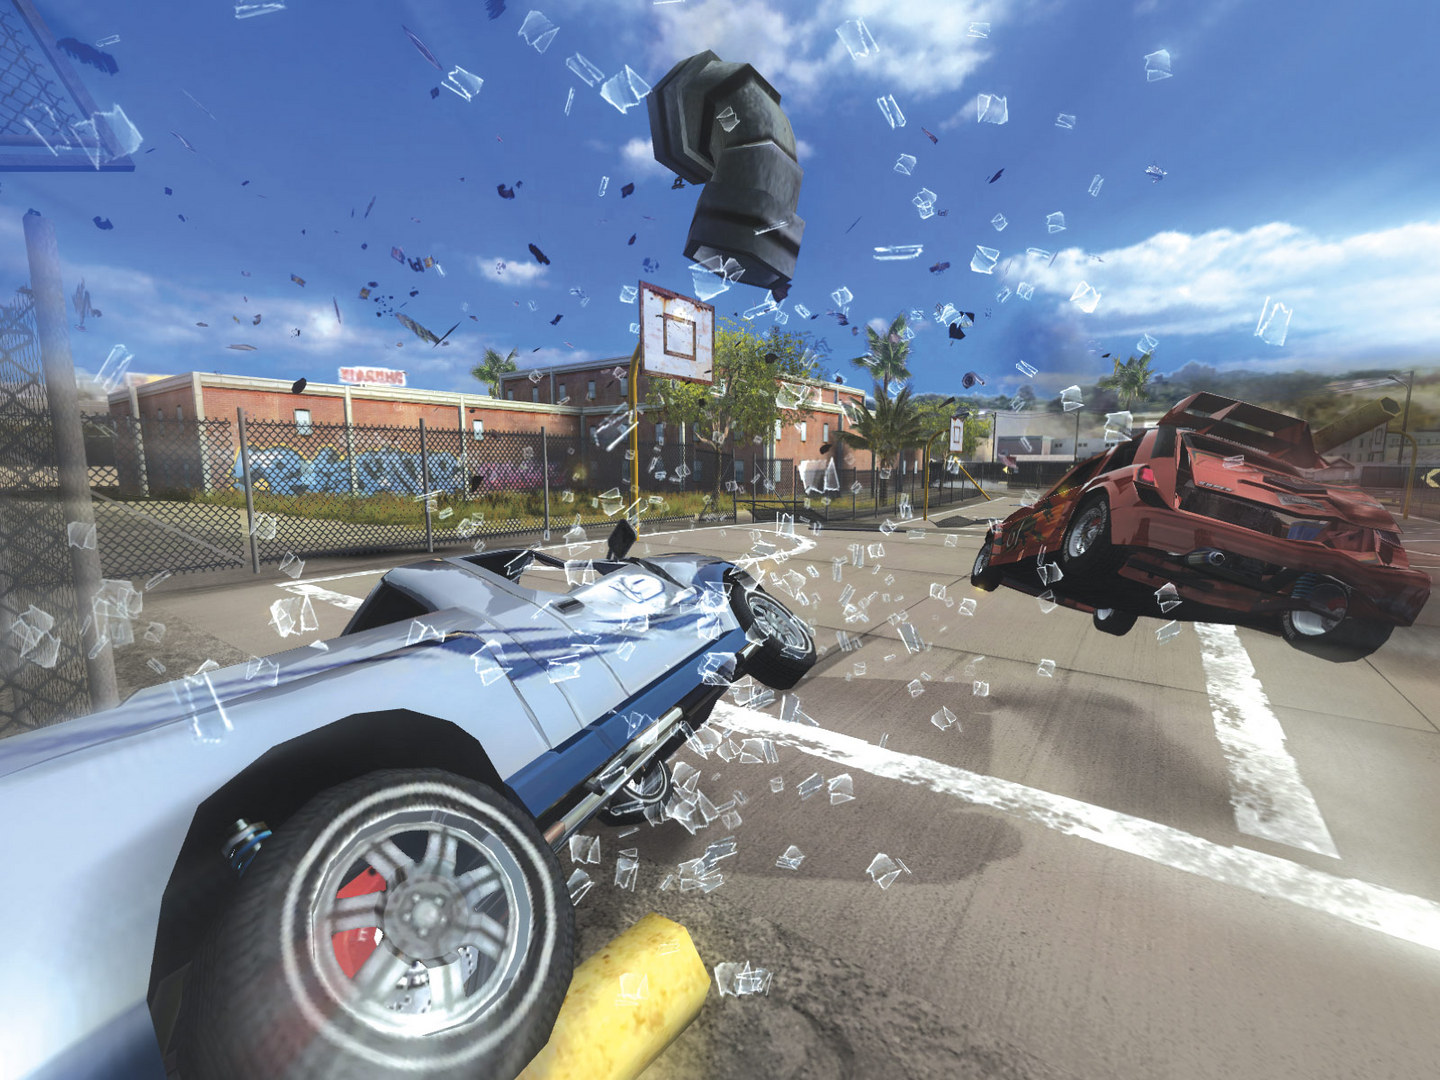 Download Flatout 2 For Free Full Version